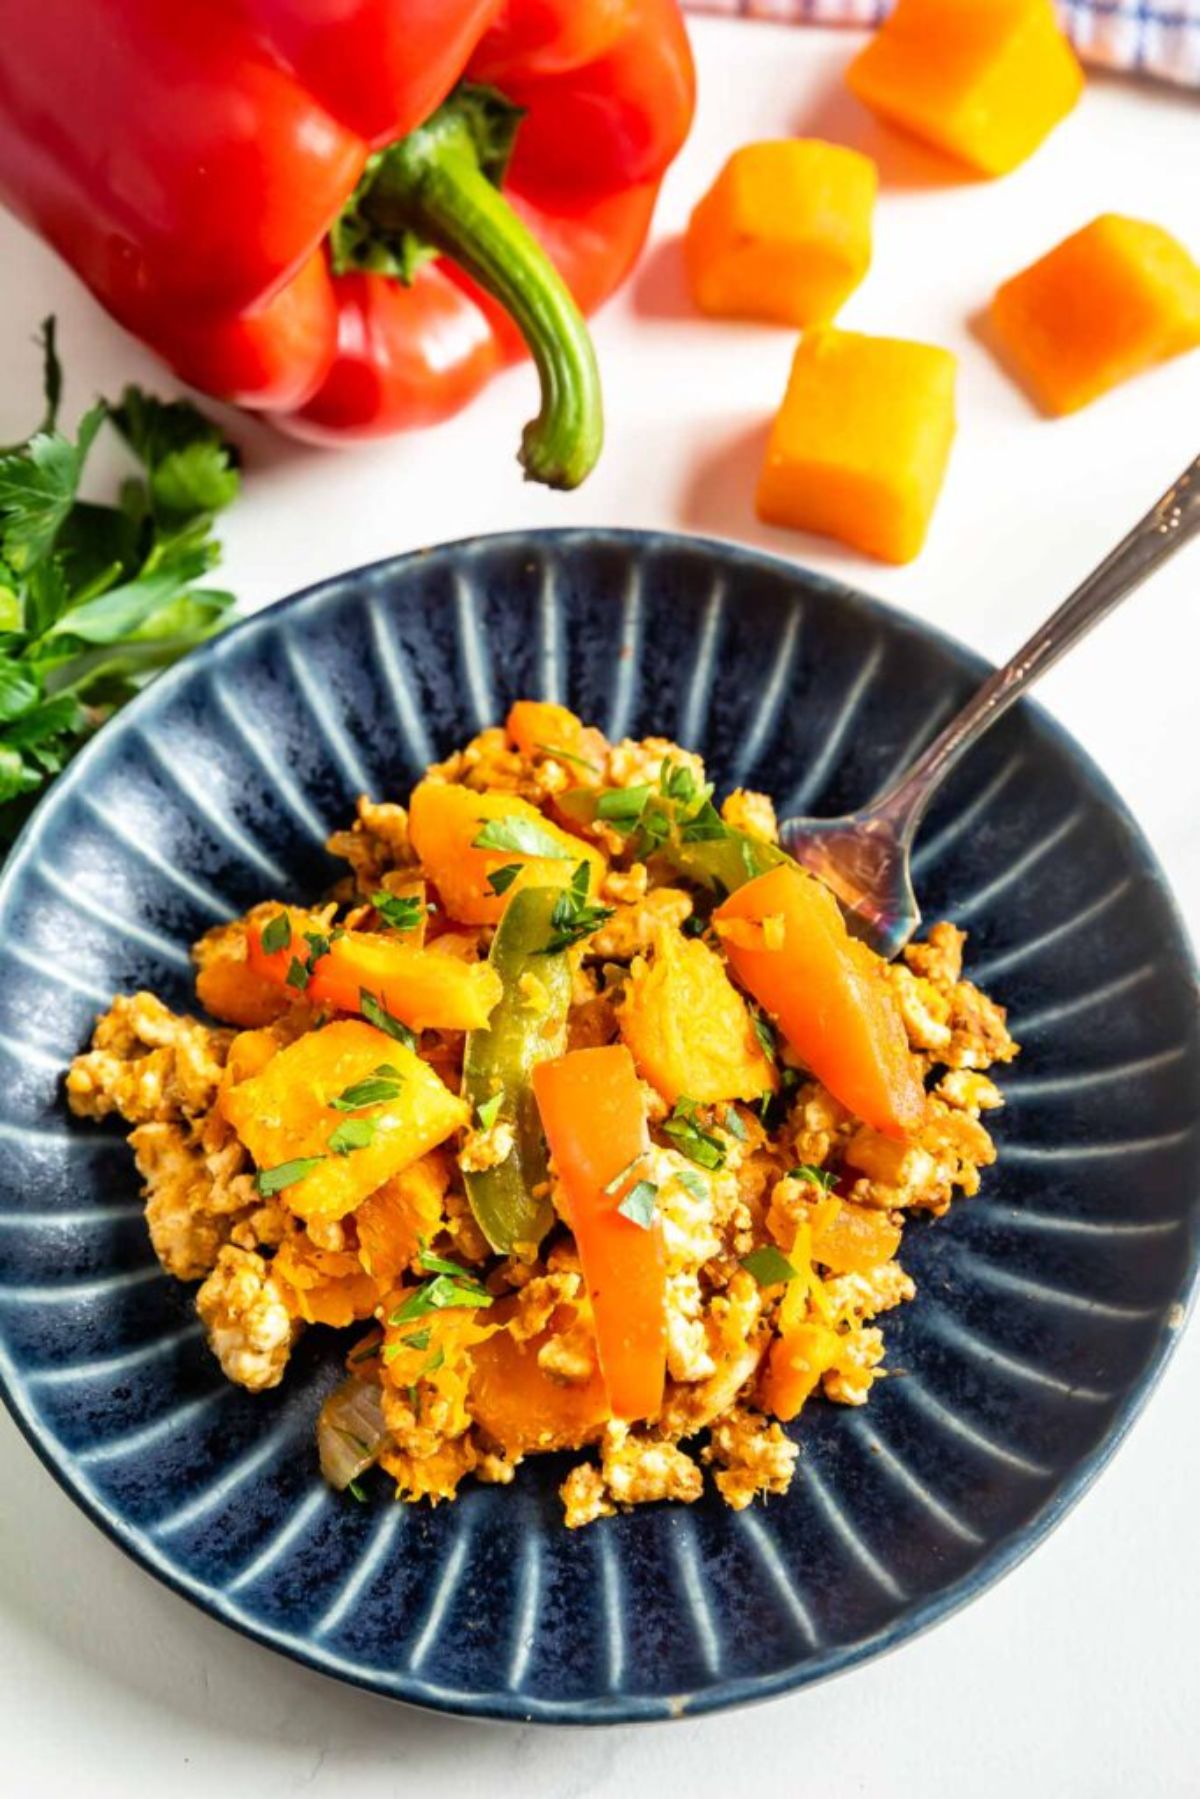 ground turkey and butternut squash in blue round plate by red bell pepper